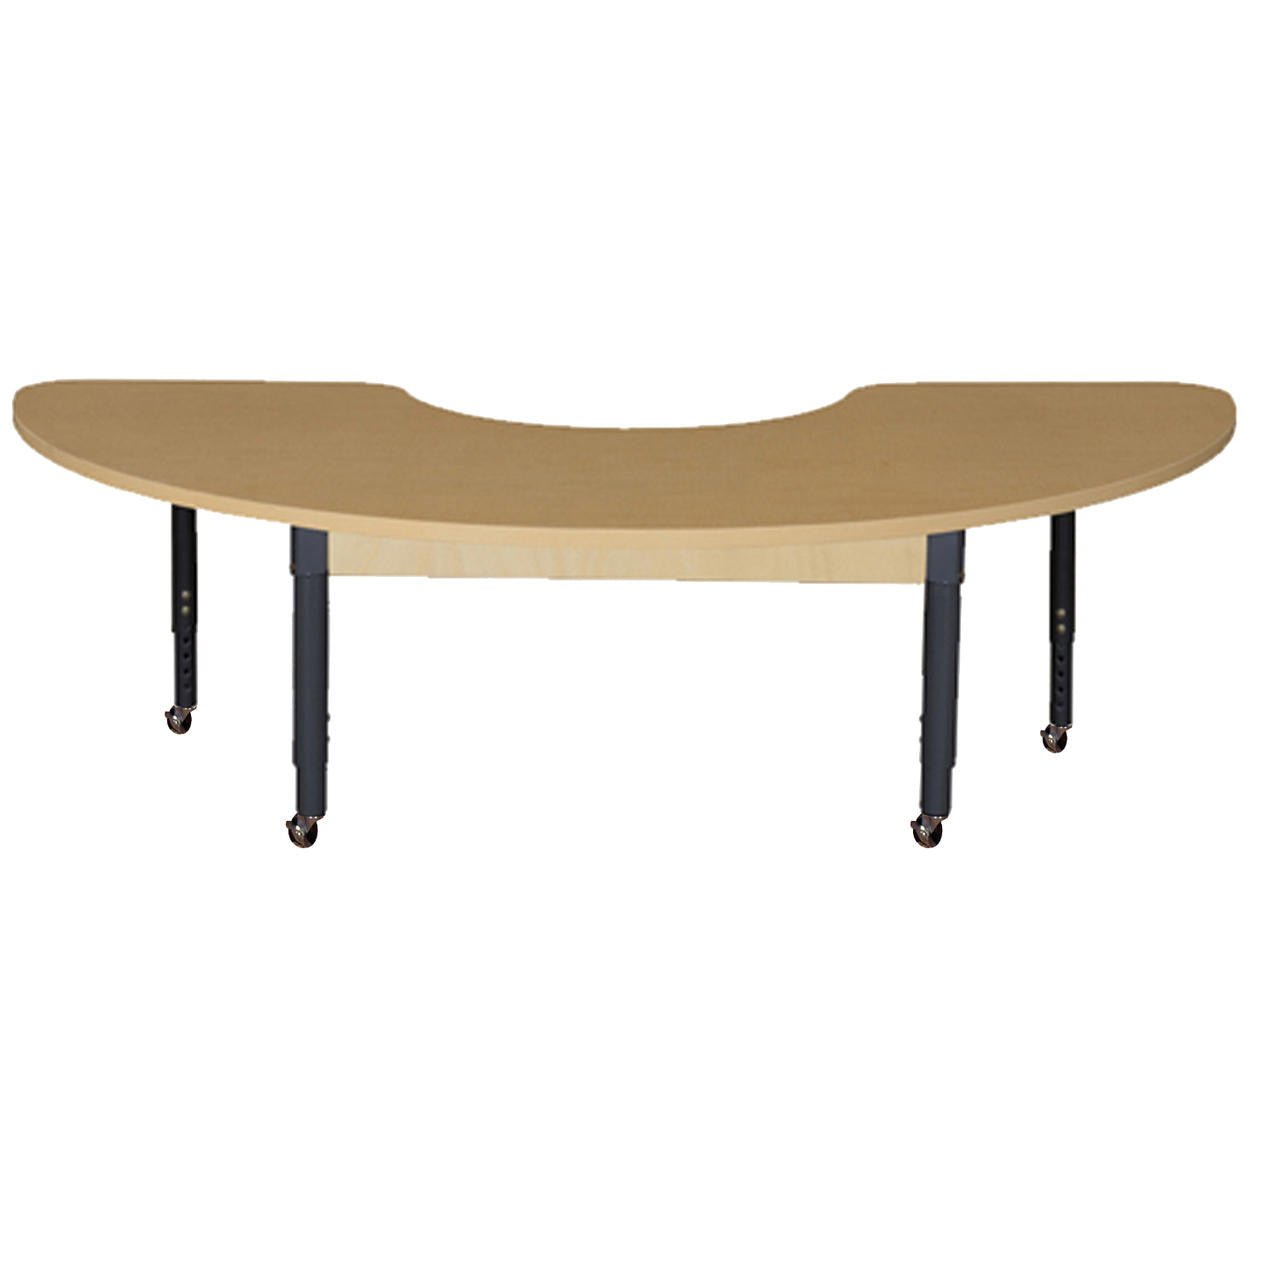 Mobile 24" x 76" Half Circle High Pressure Laminate Table with Adjustable Legs 14-19"